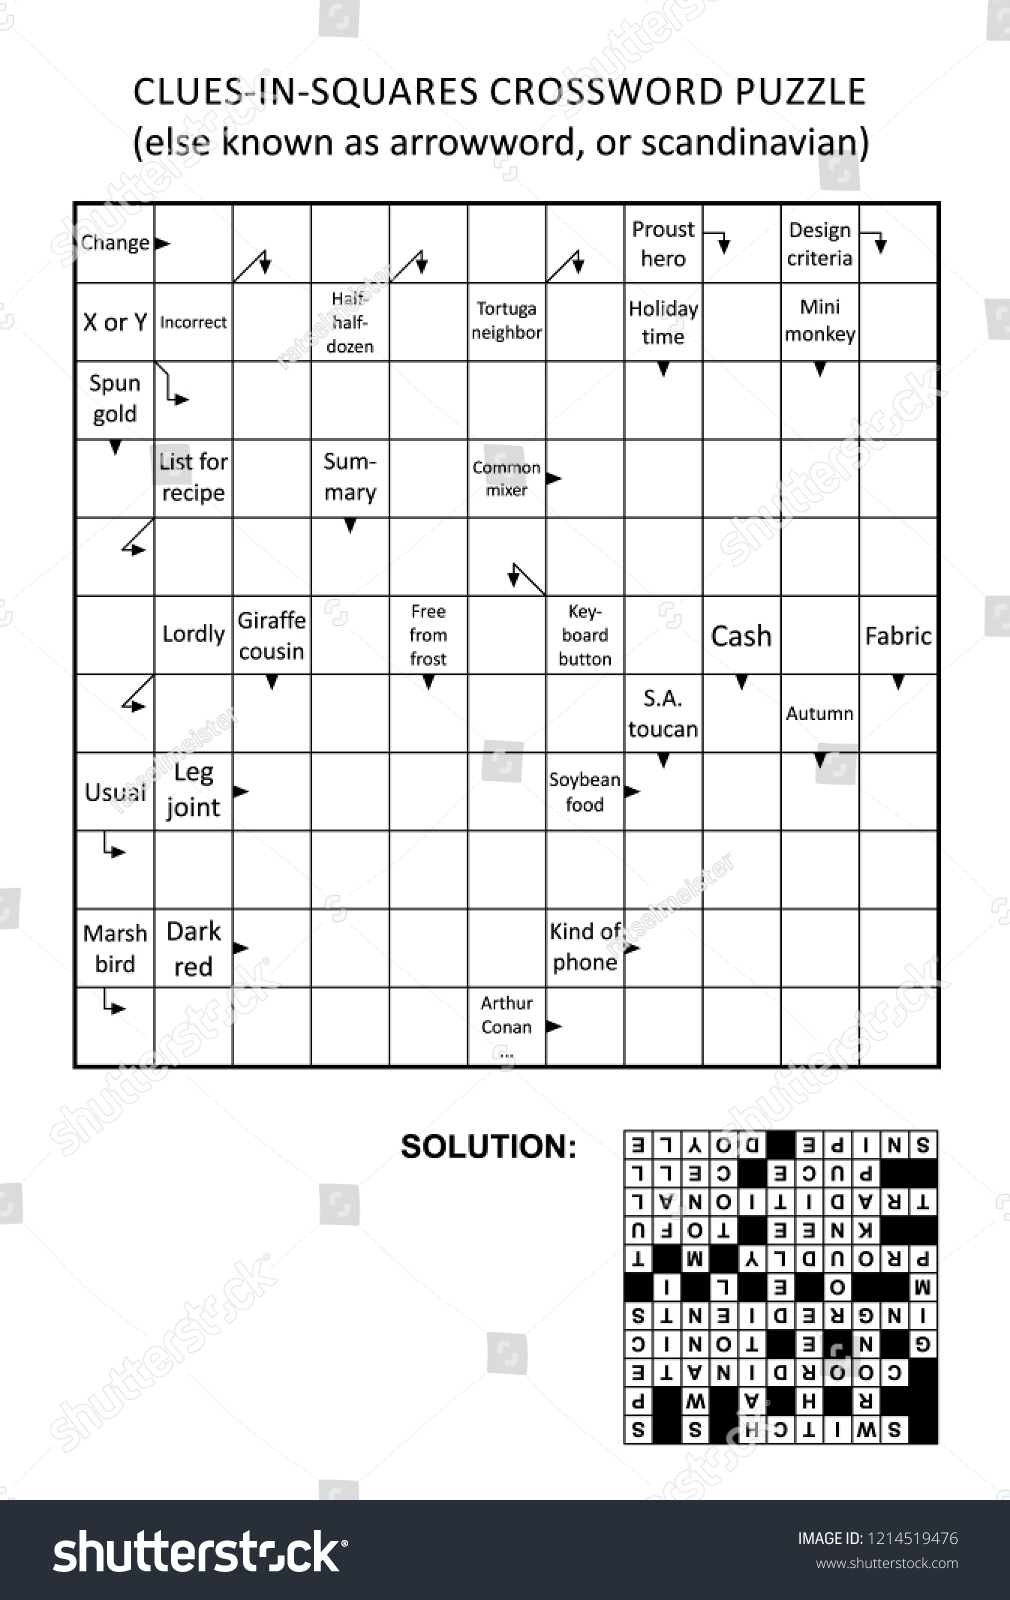 Royalty Free Stock Illustration Of Cluesinsquares Crossword Puzzle - Printable Arrow Crossword Puzzles For Free